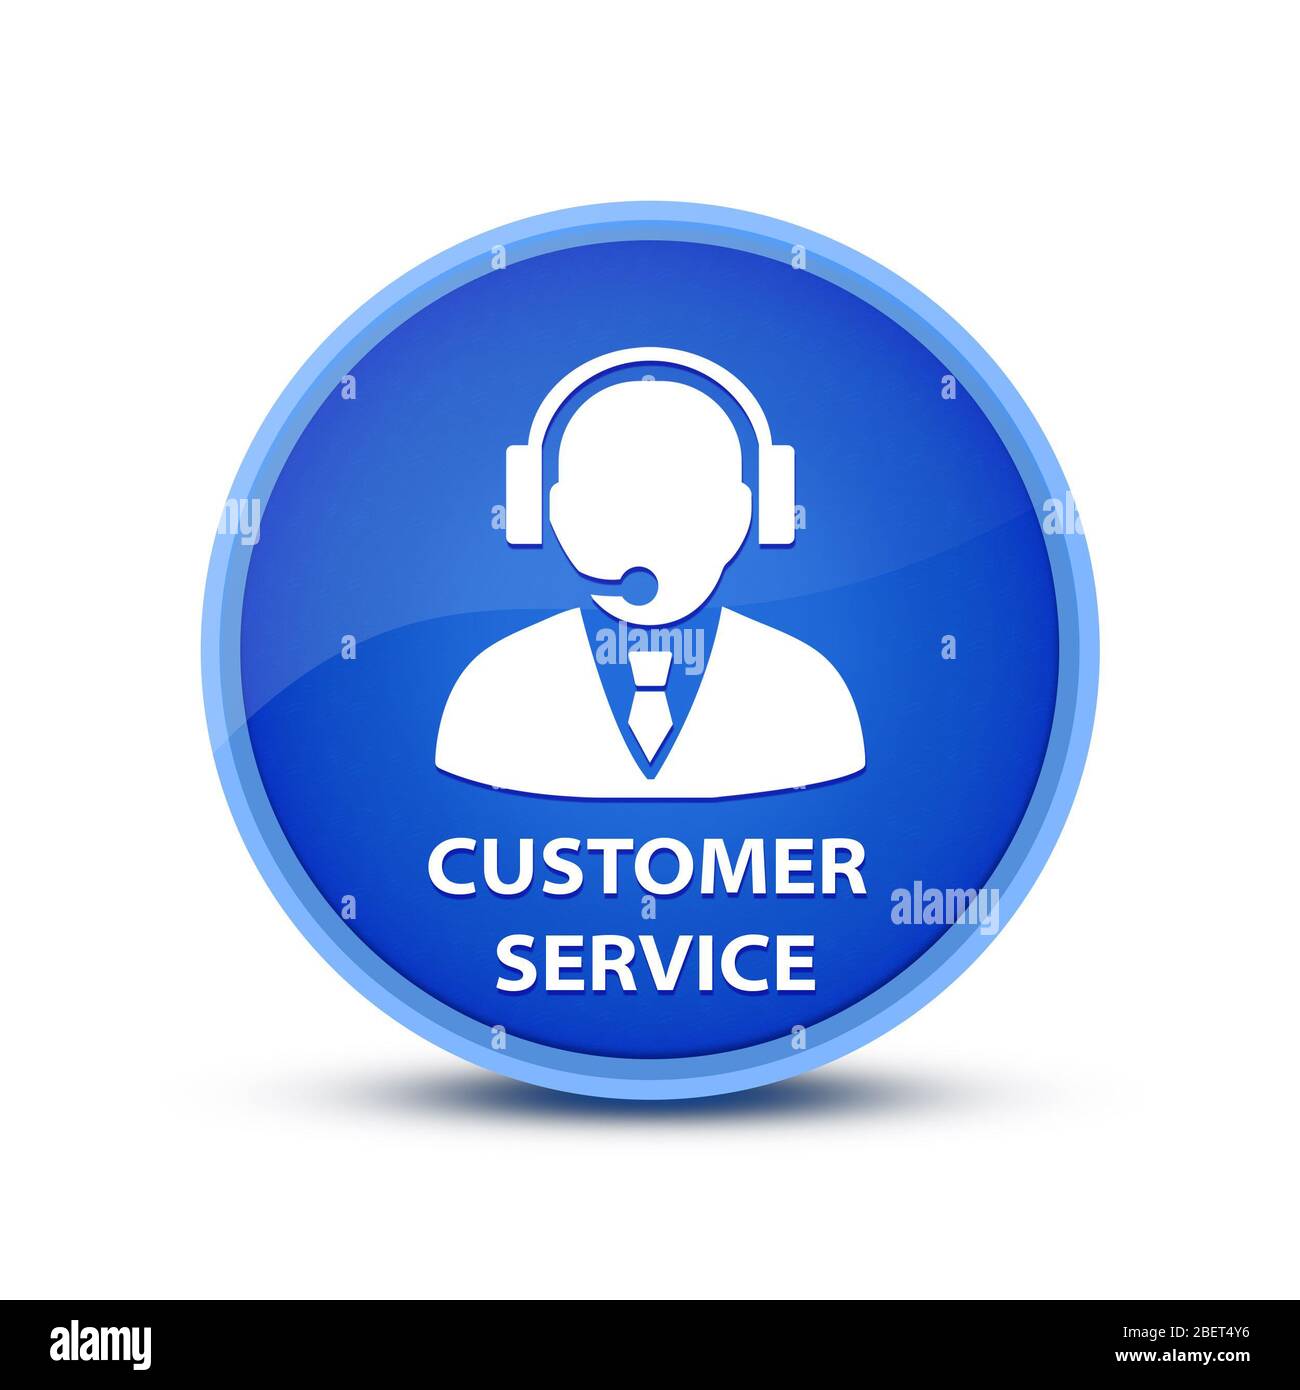 Customer service (Contact icon) isolated on special blue round button abstract illustration Stock Photo